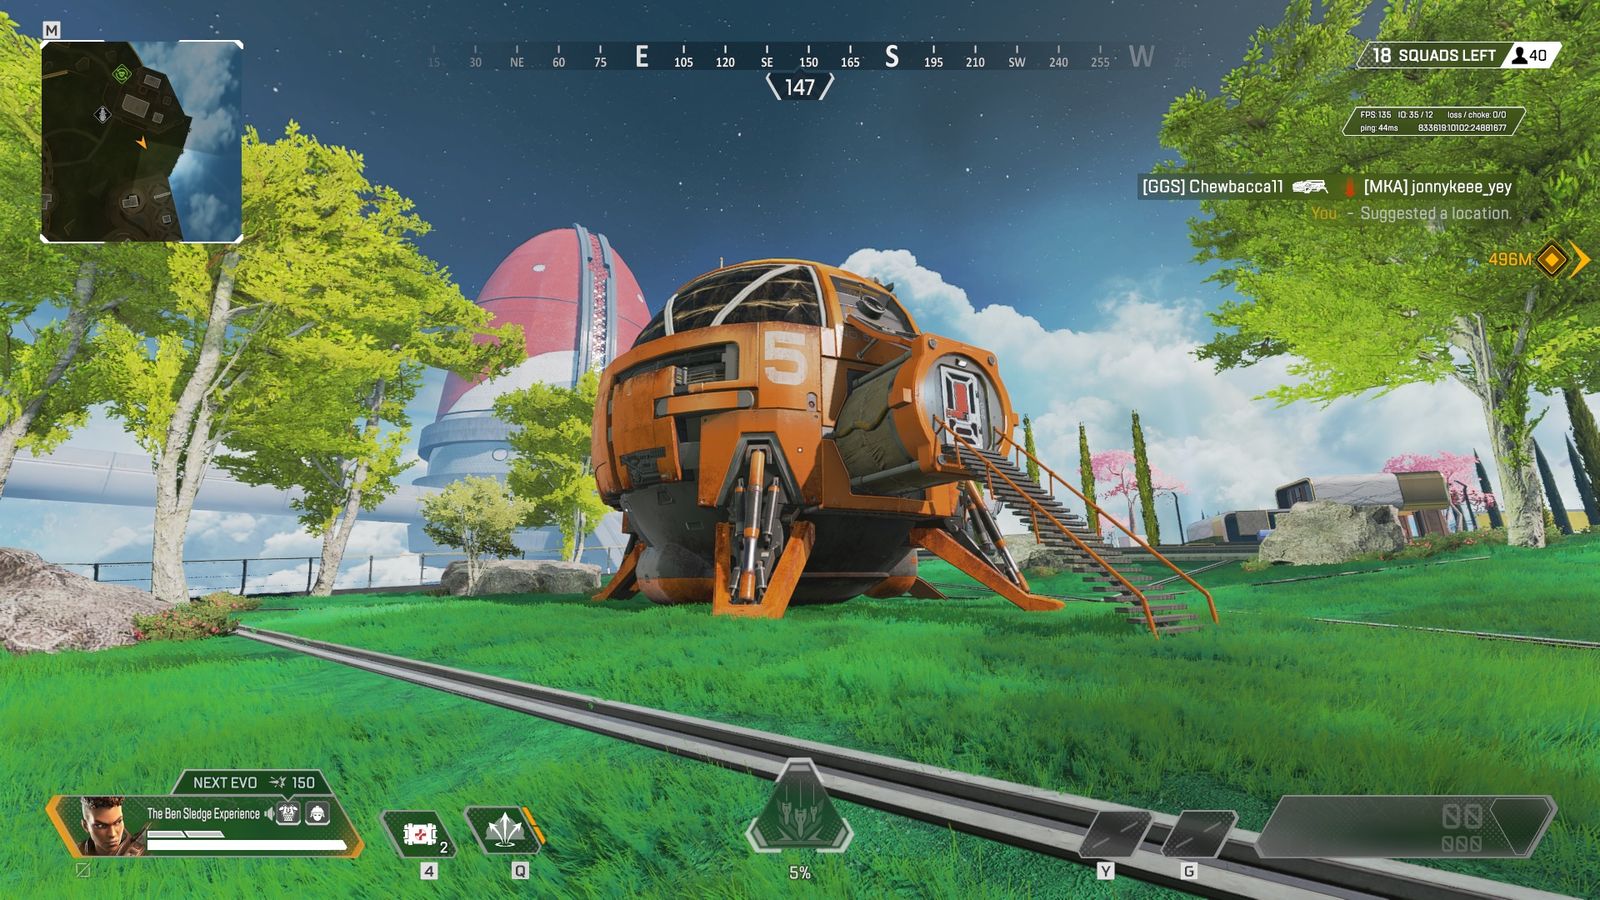 An orange, spherical space ship has landed neatly in the green fields of Apex Legends' Olympus map.